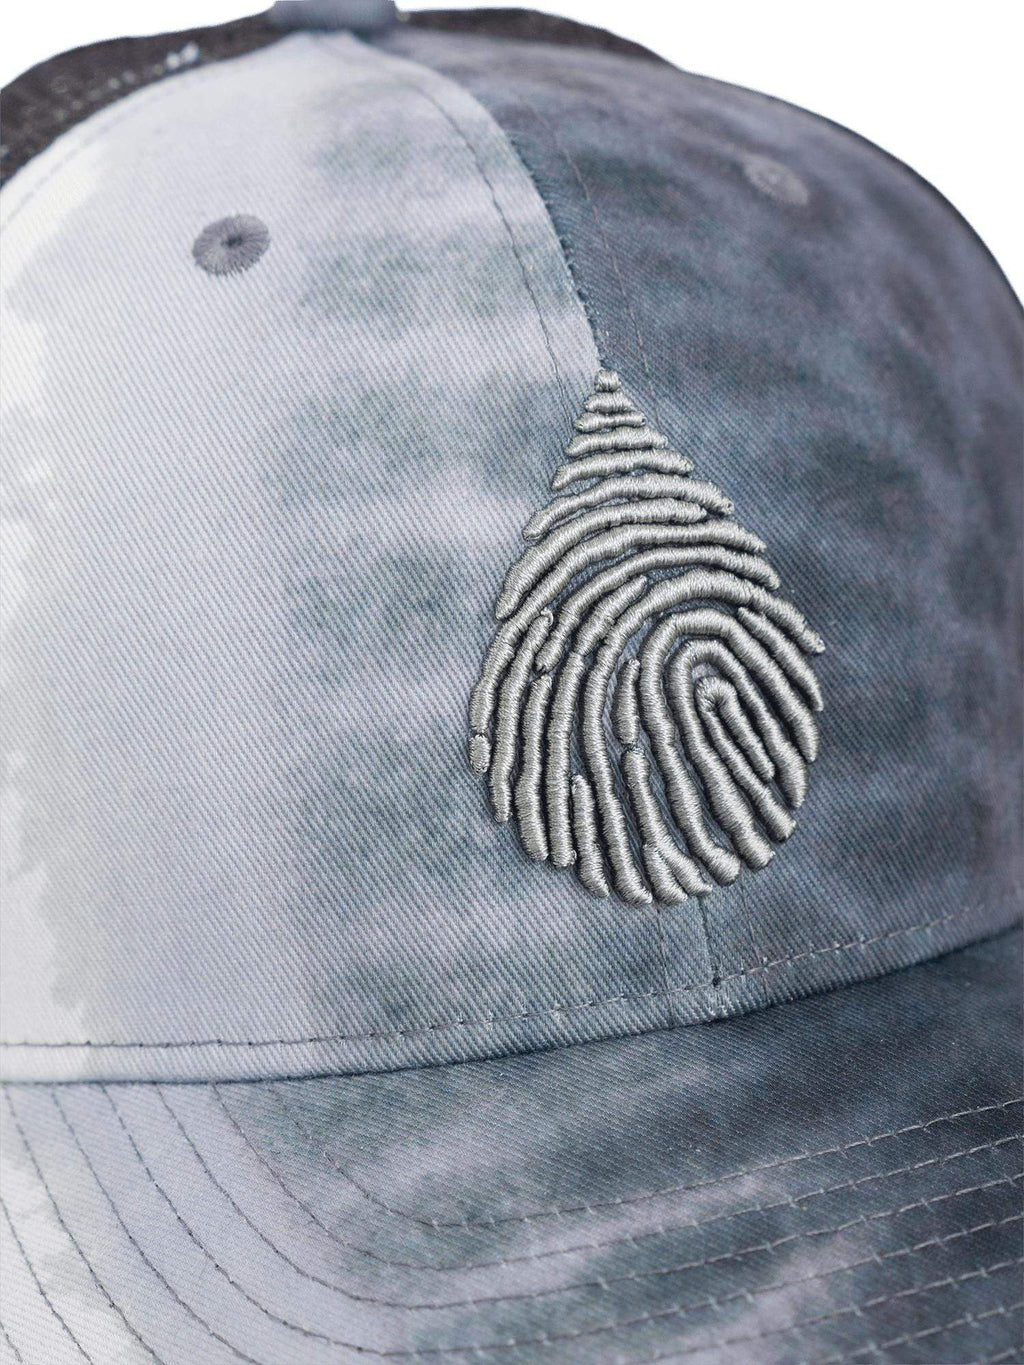 Close up view of the waterlust logo embroidered on a tiger shark printed recycled trucker cap hat